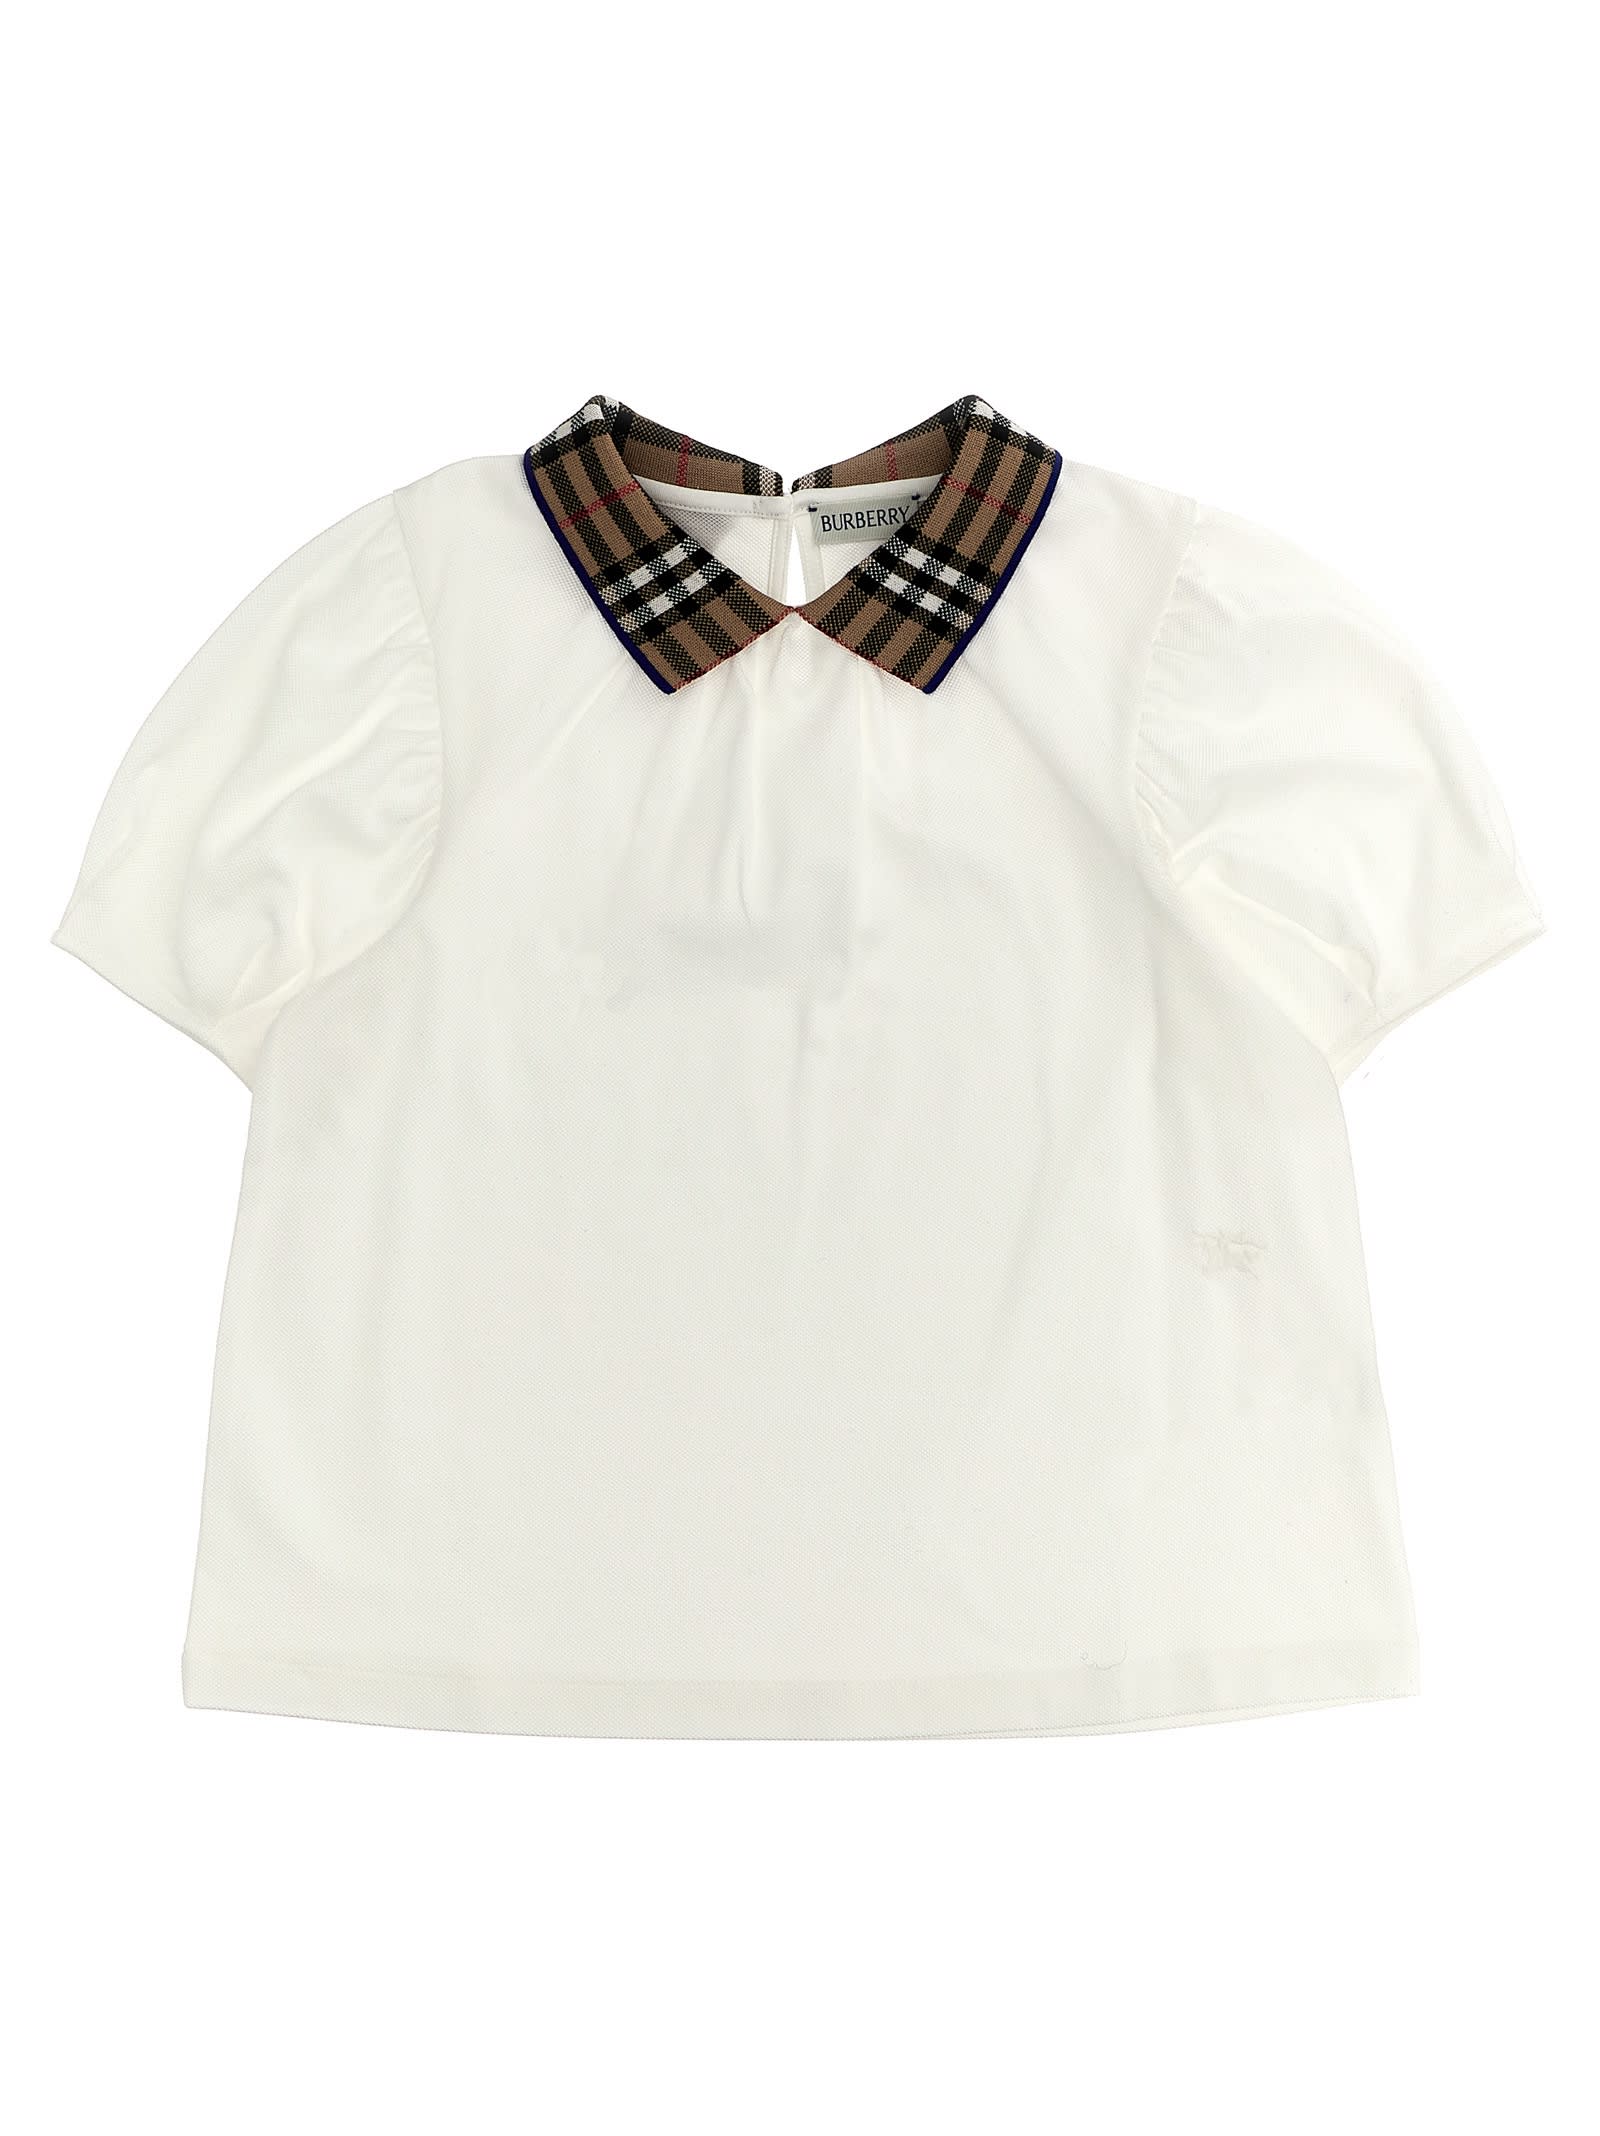 Burberry Kids' Alessa Polo Shirt In White